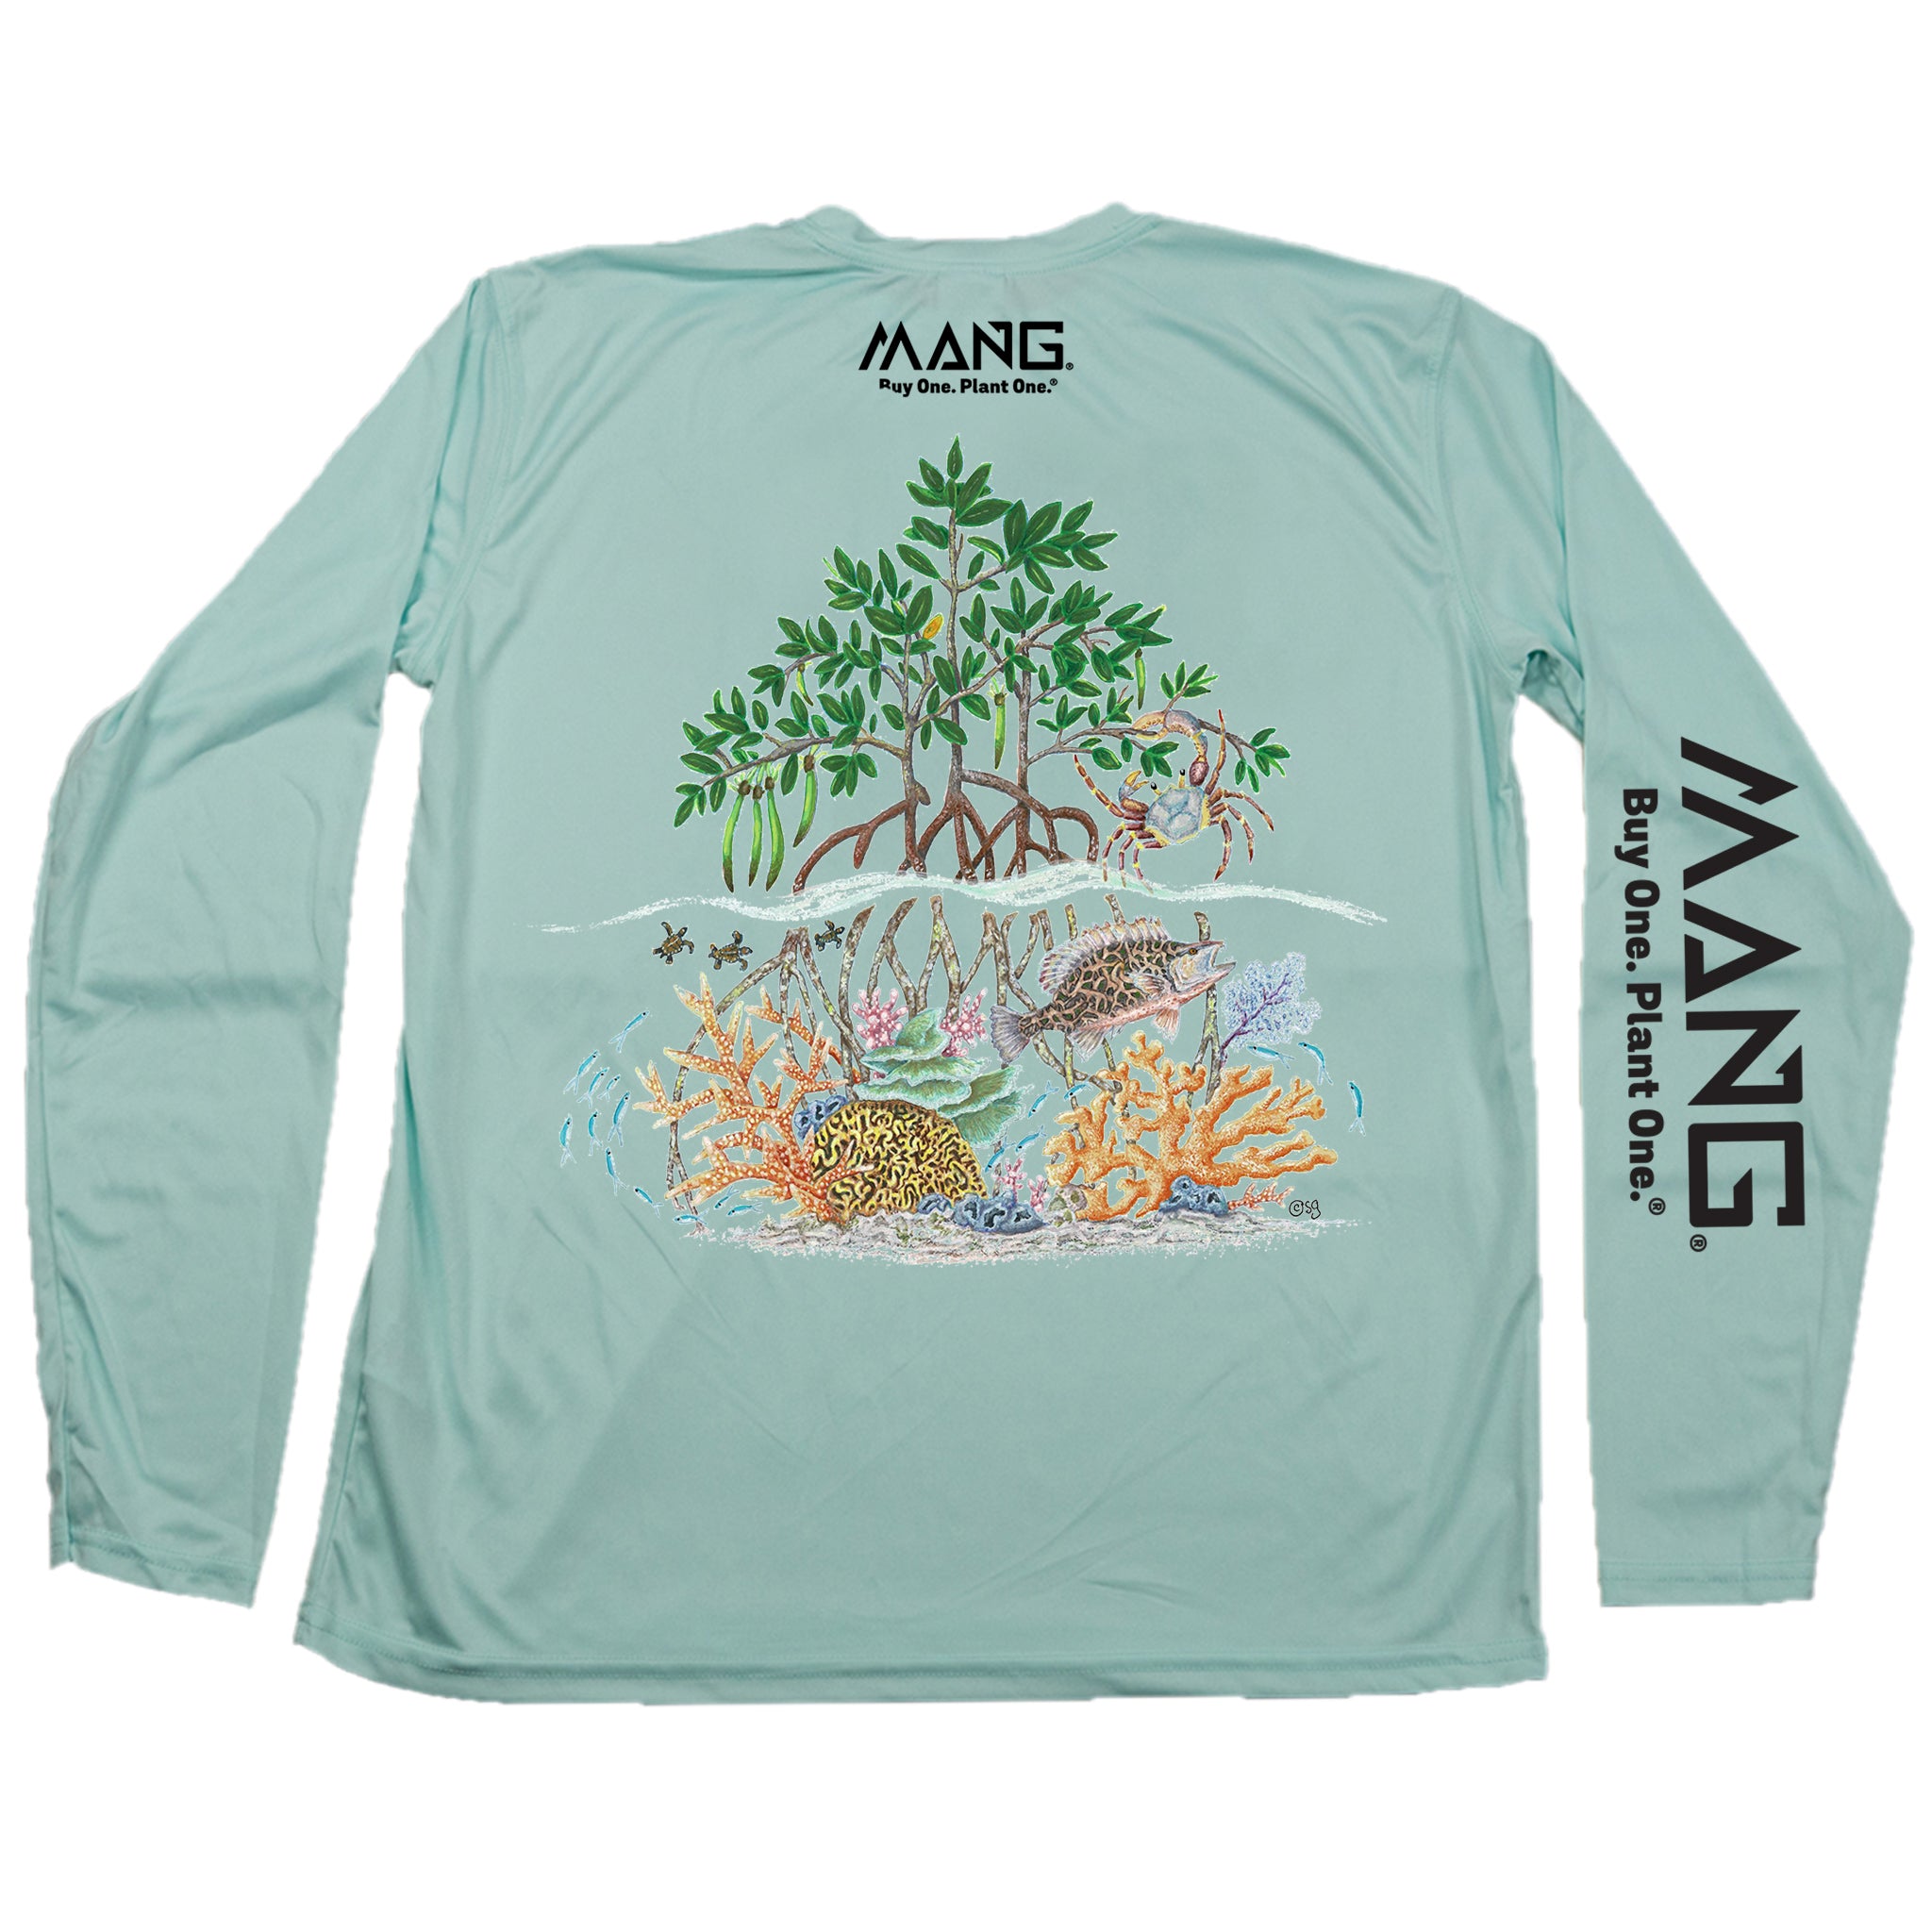 MANG Raise The Reef MANG - LS - XS-Seagrass